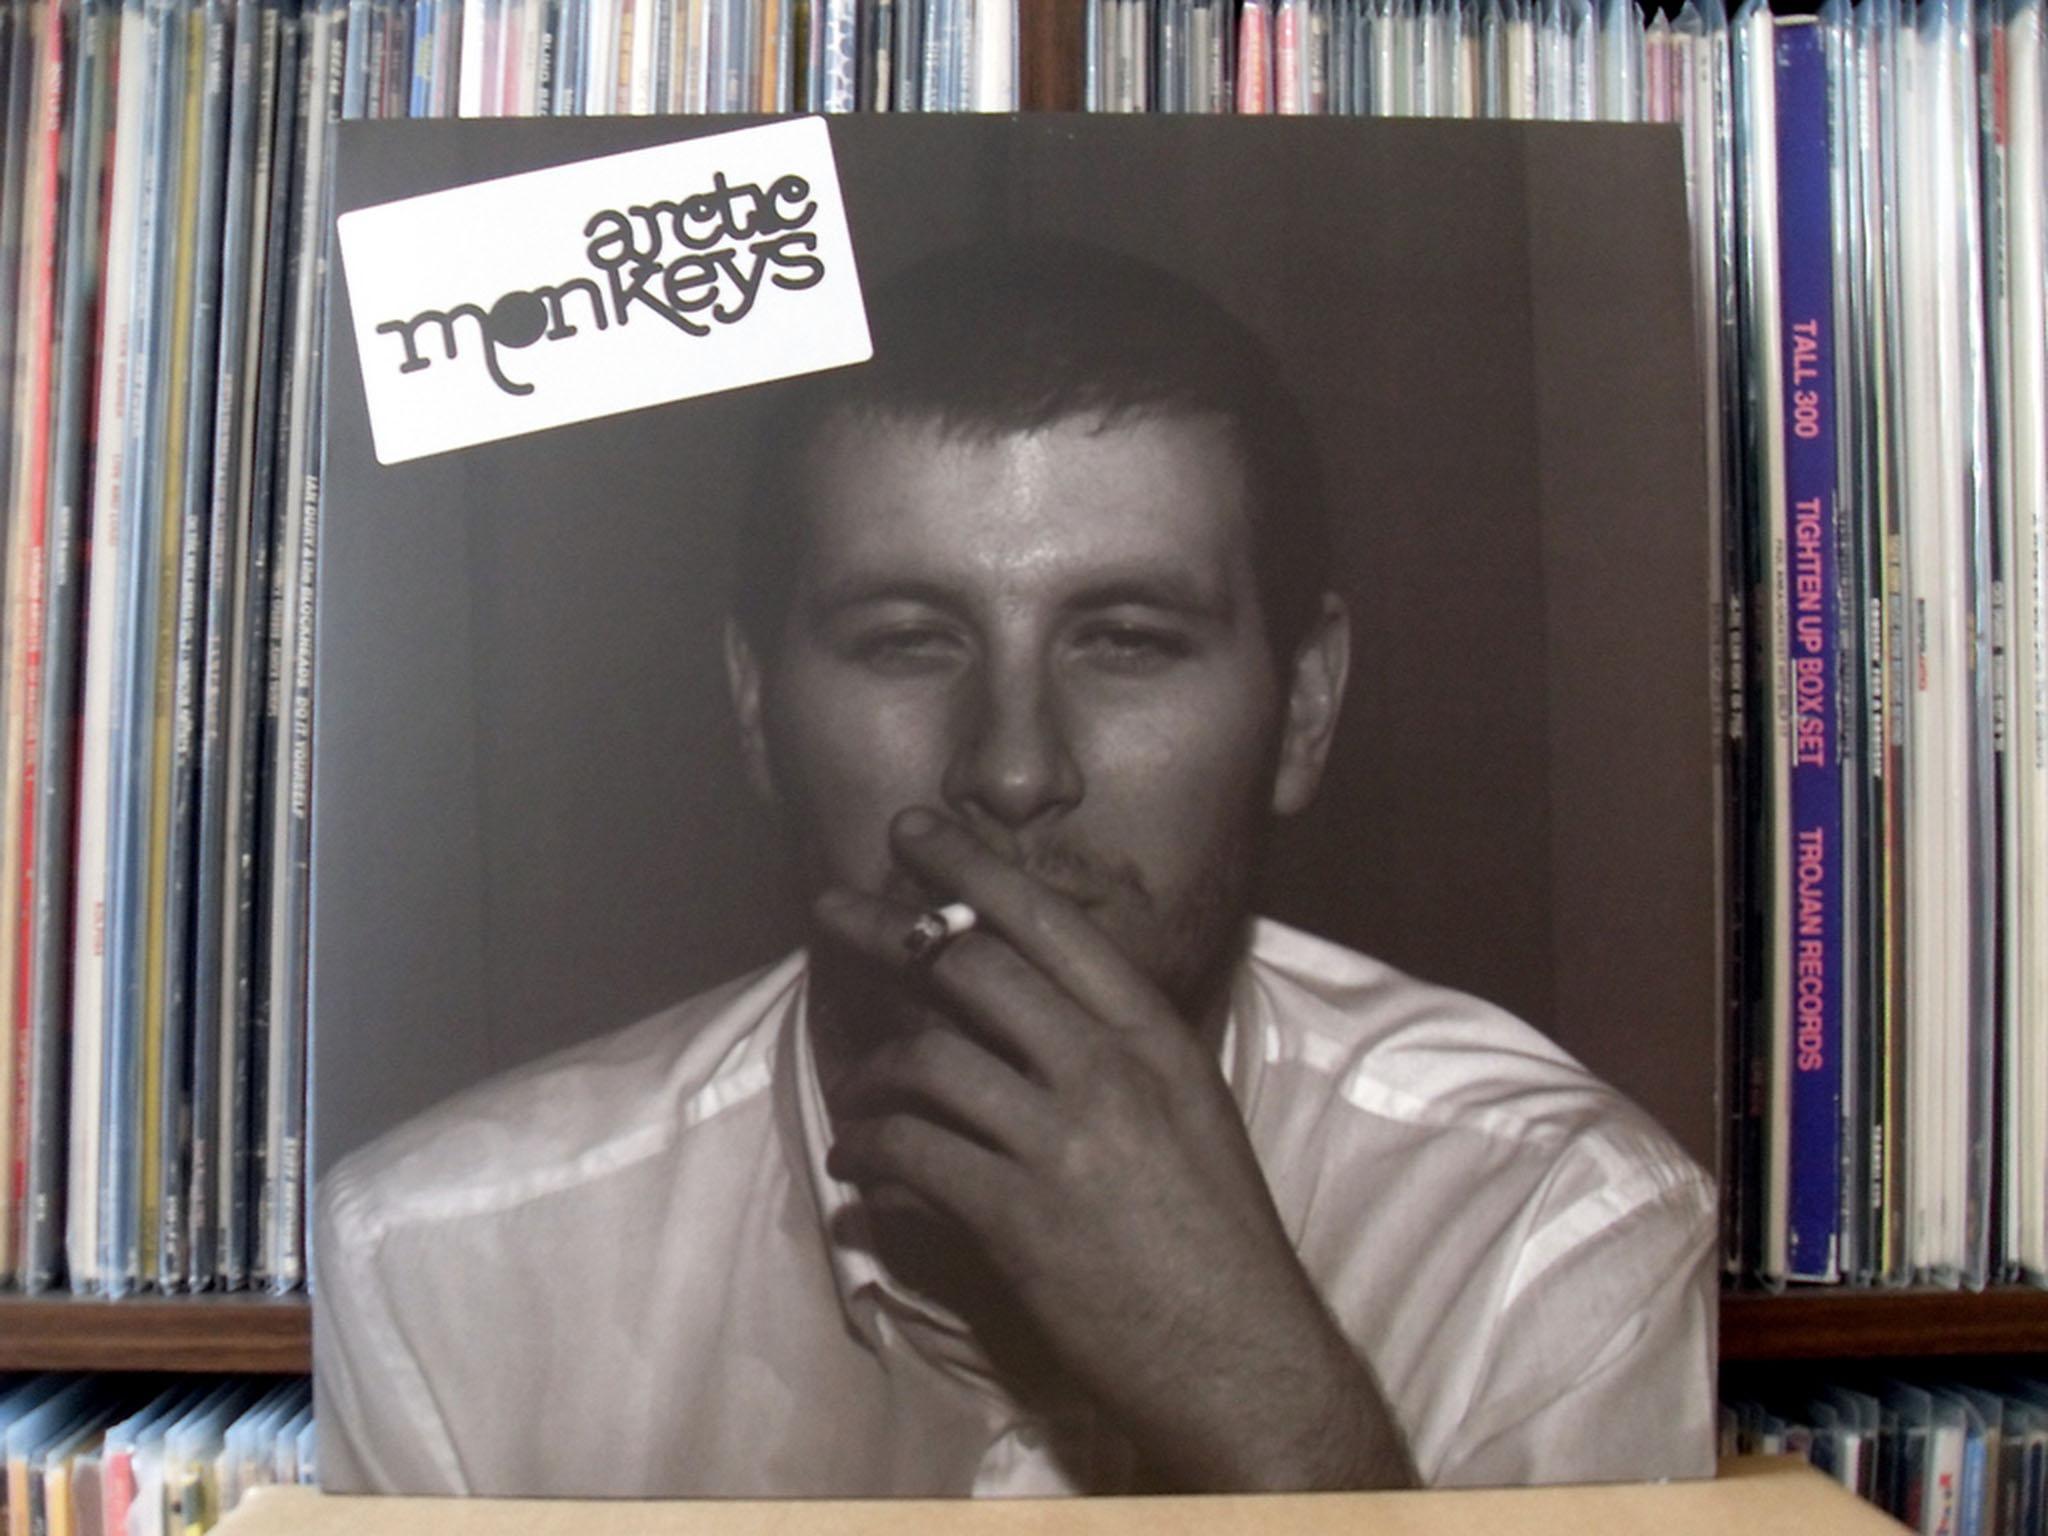 Torch carriers: Arctic Monkeys were among those who kept faith with the format in the difficult early Noughties